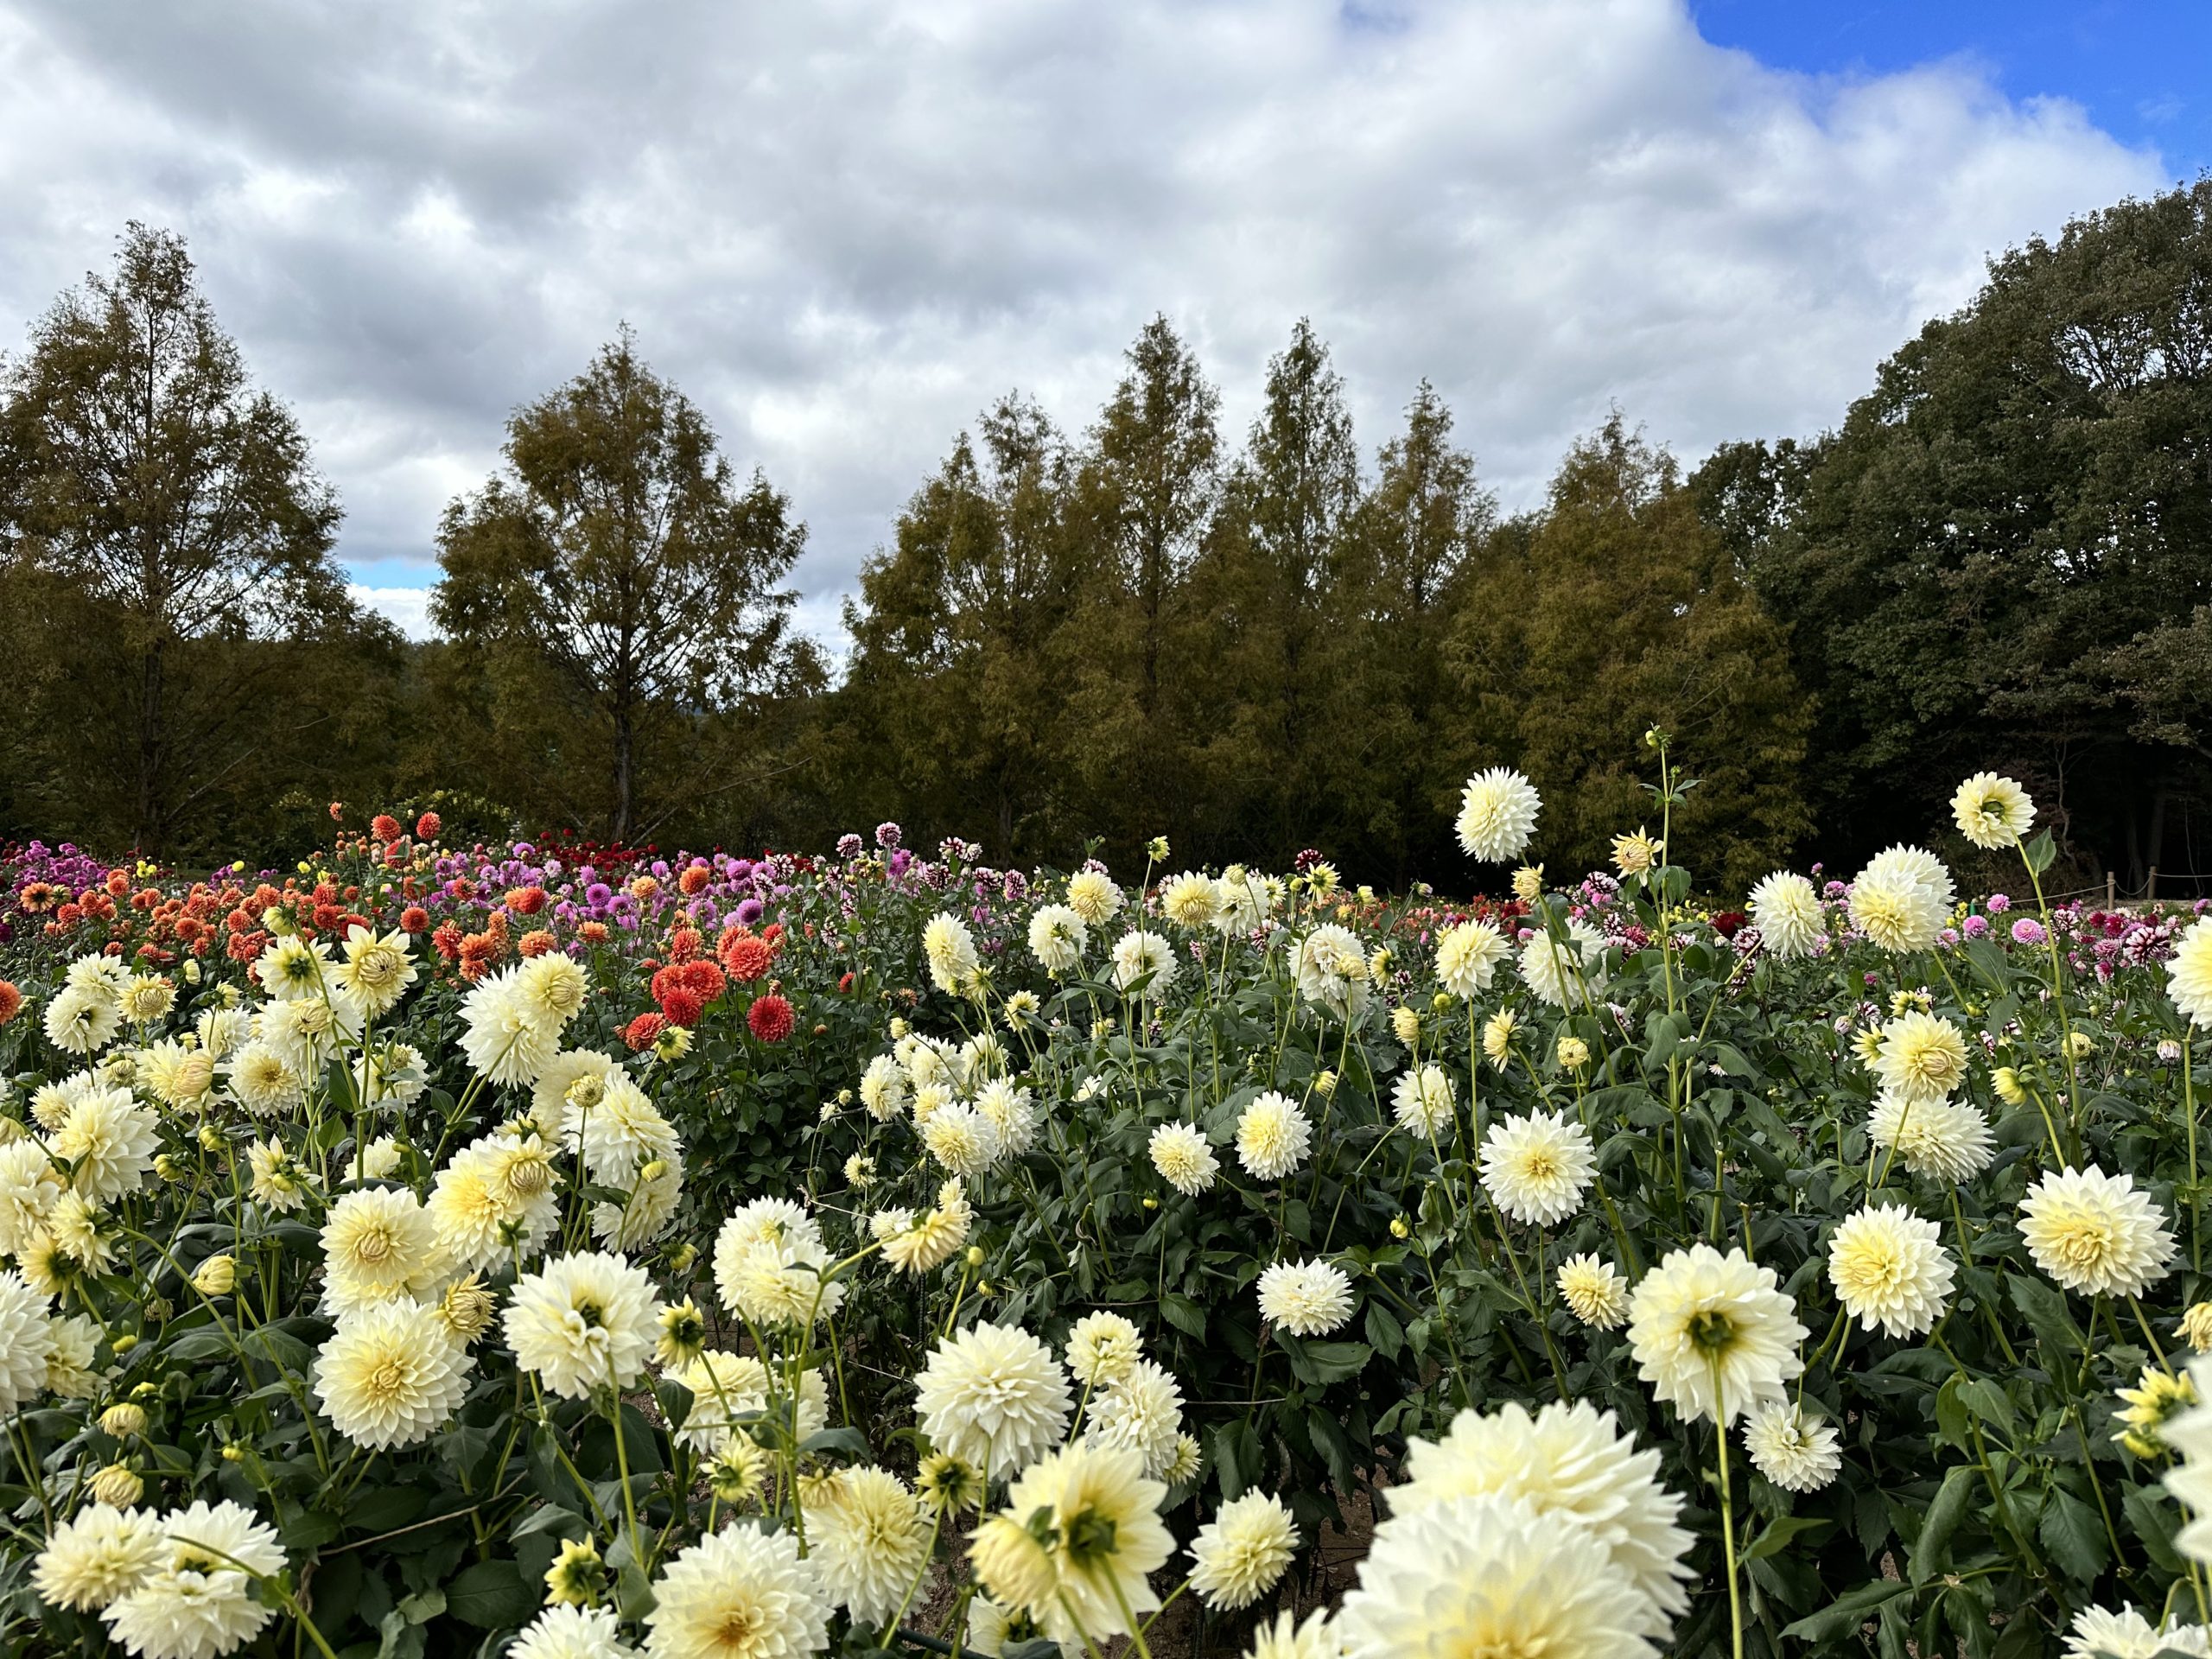 【Park open】Dahlia 【The best season for viewing flowers】Garden Mom 【The best time for viewing is past】Cosmos【The best season for viewing flowers】